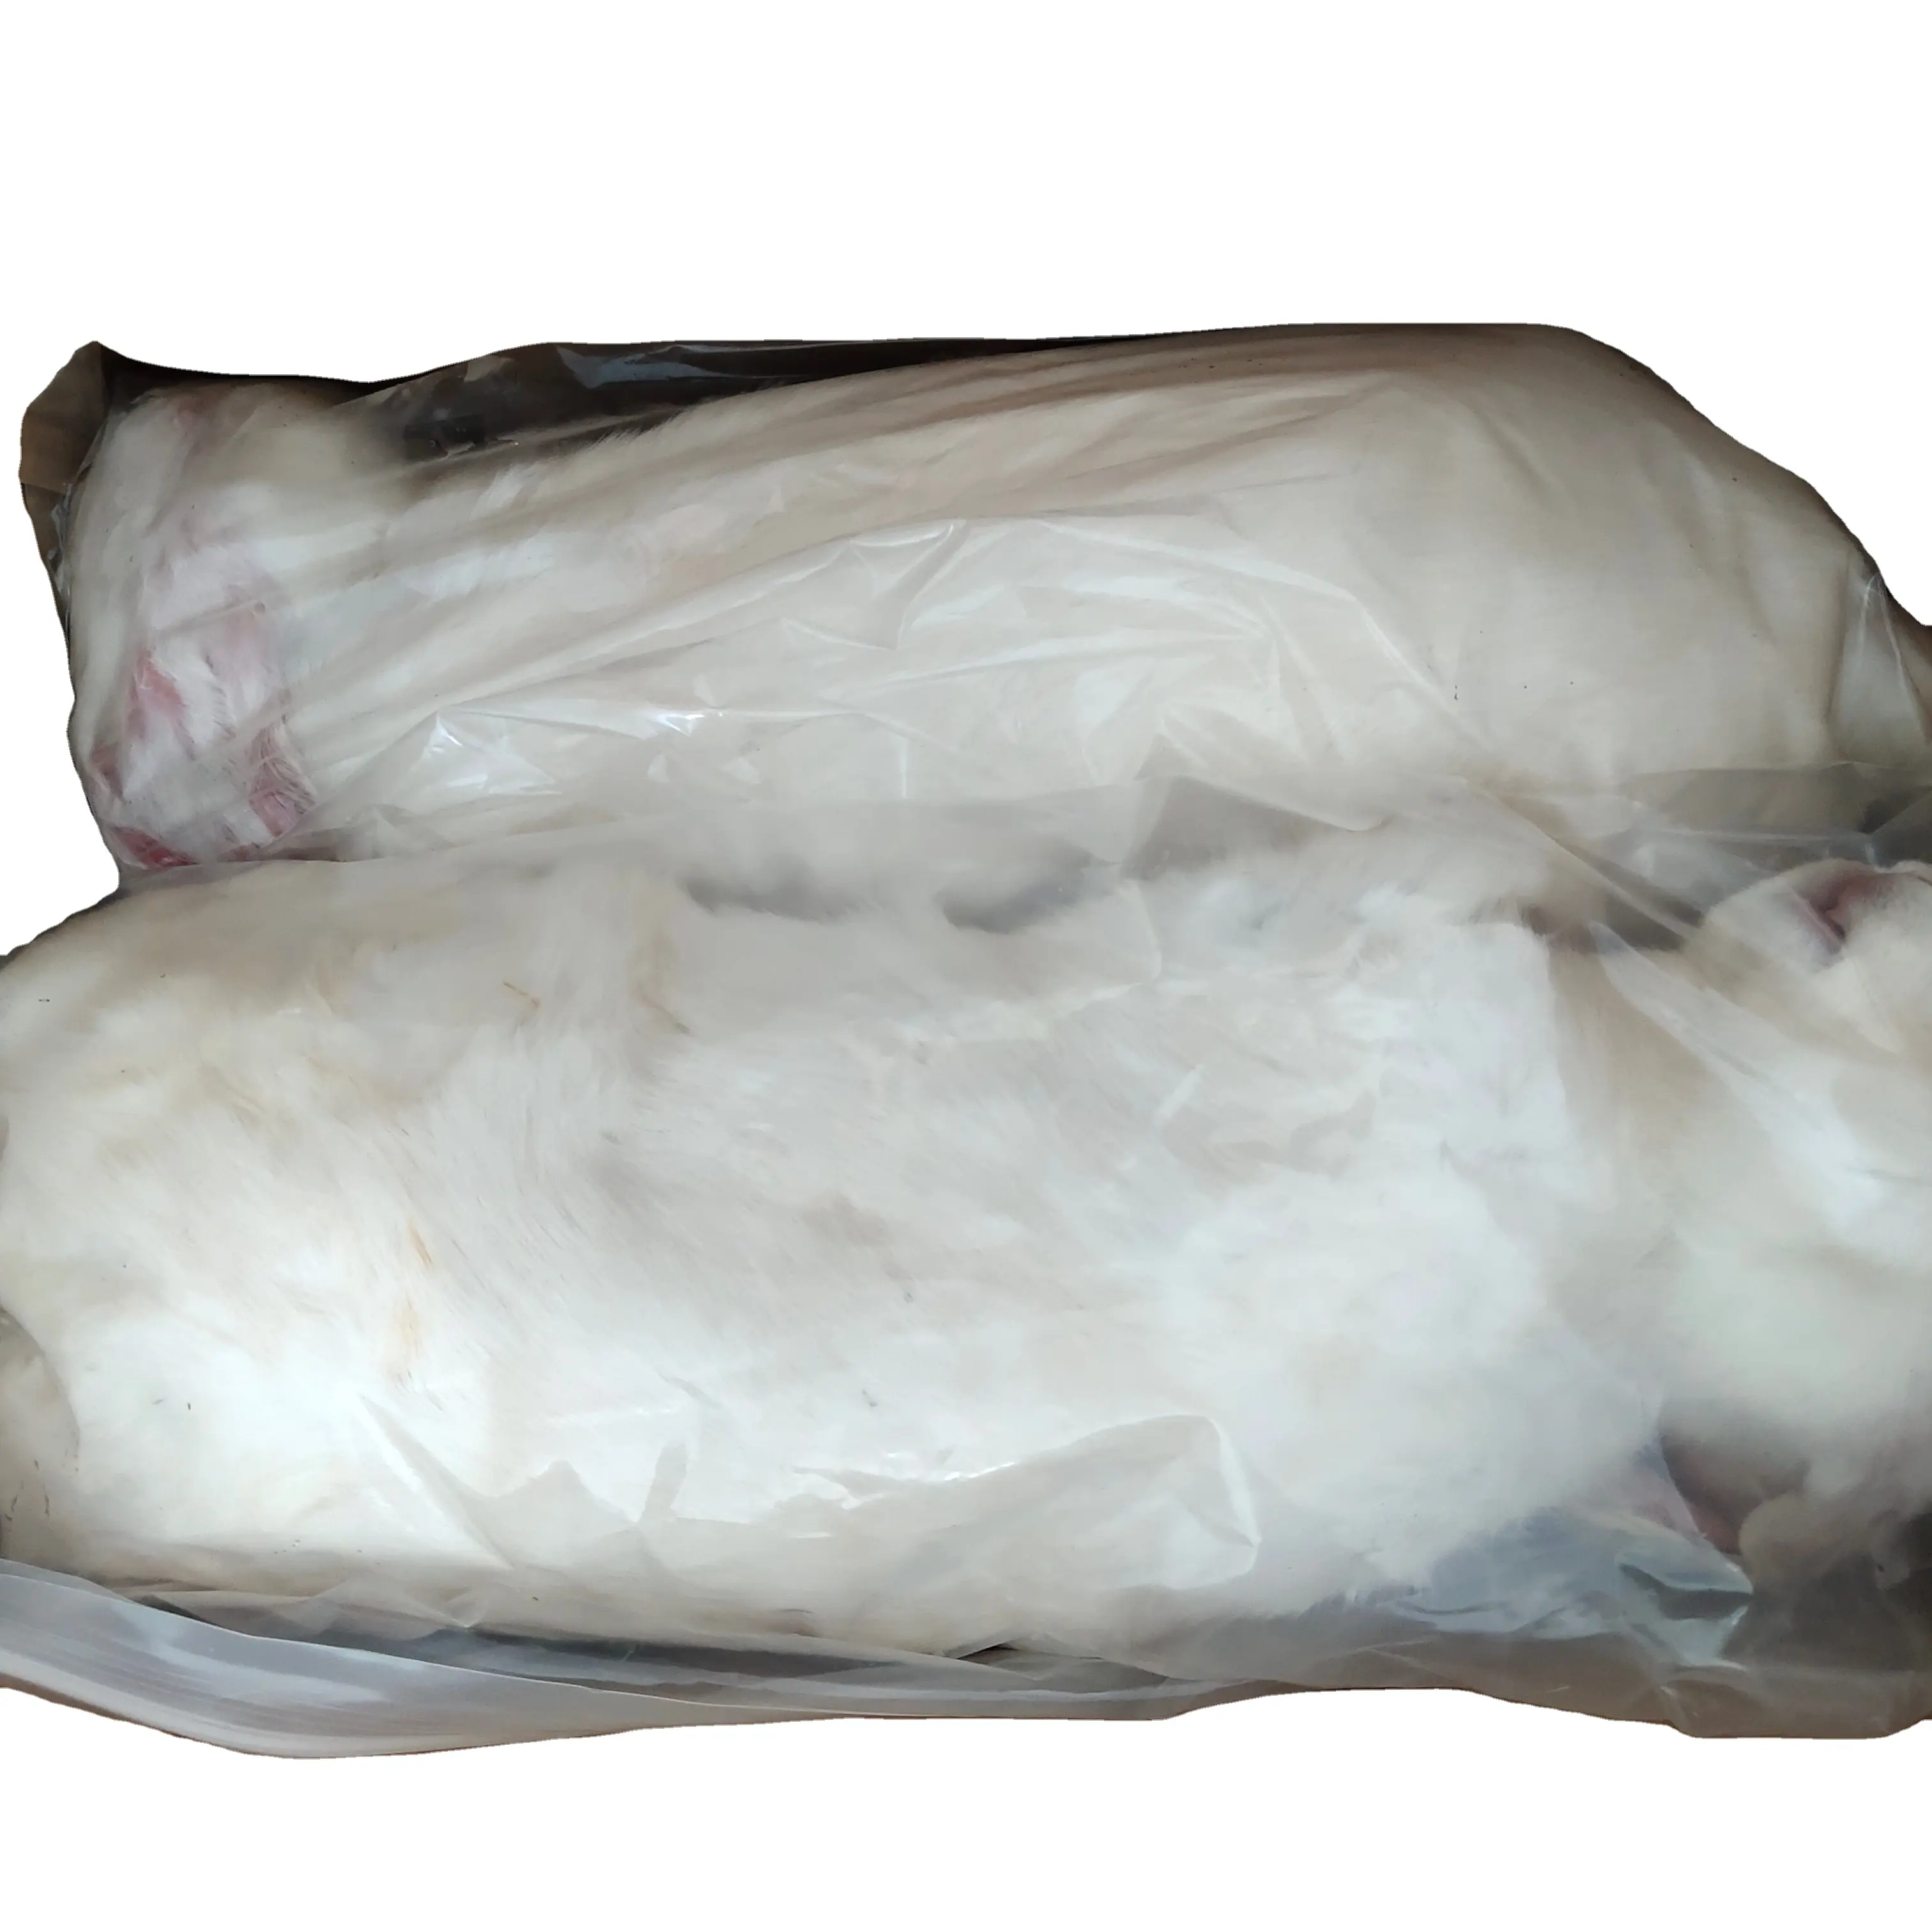 Frozen Whole Rabbits For Large Predators Reptiles And Birds Of Prey Farm Breed For Animal Consumption